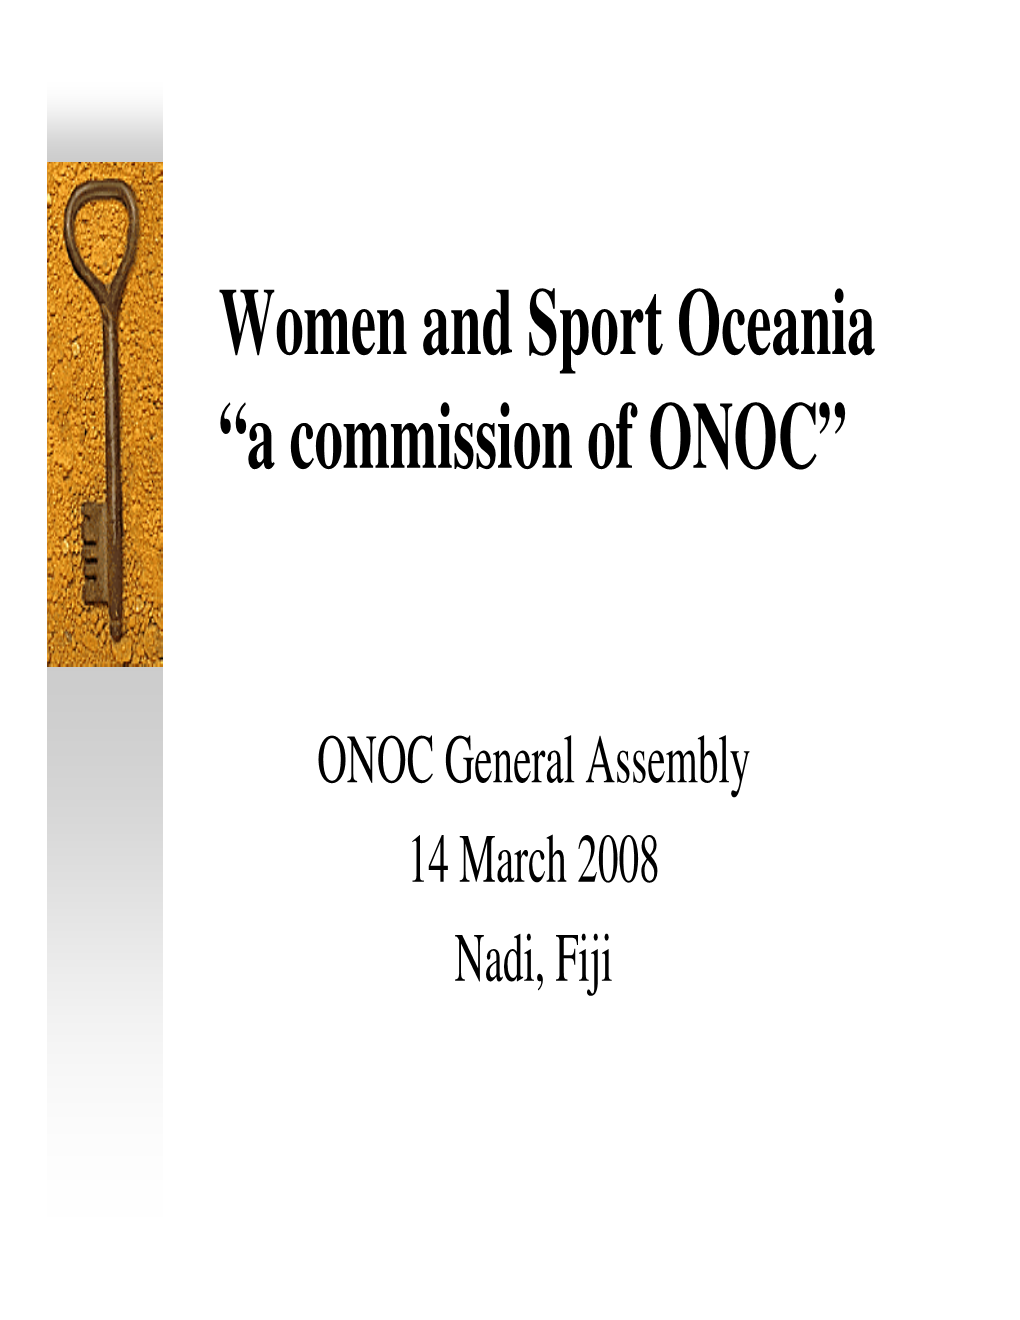 Women and Sport Oceania “A Commission of ONOC”